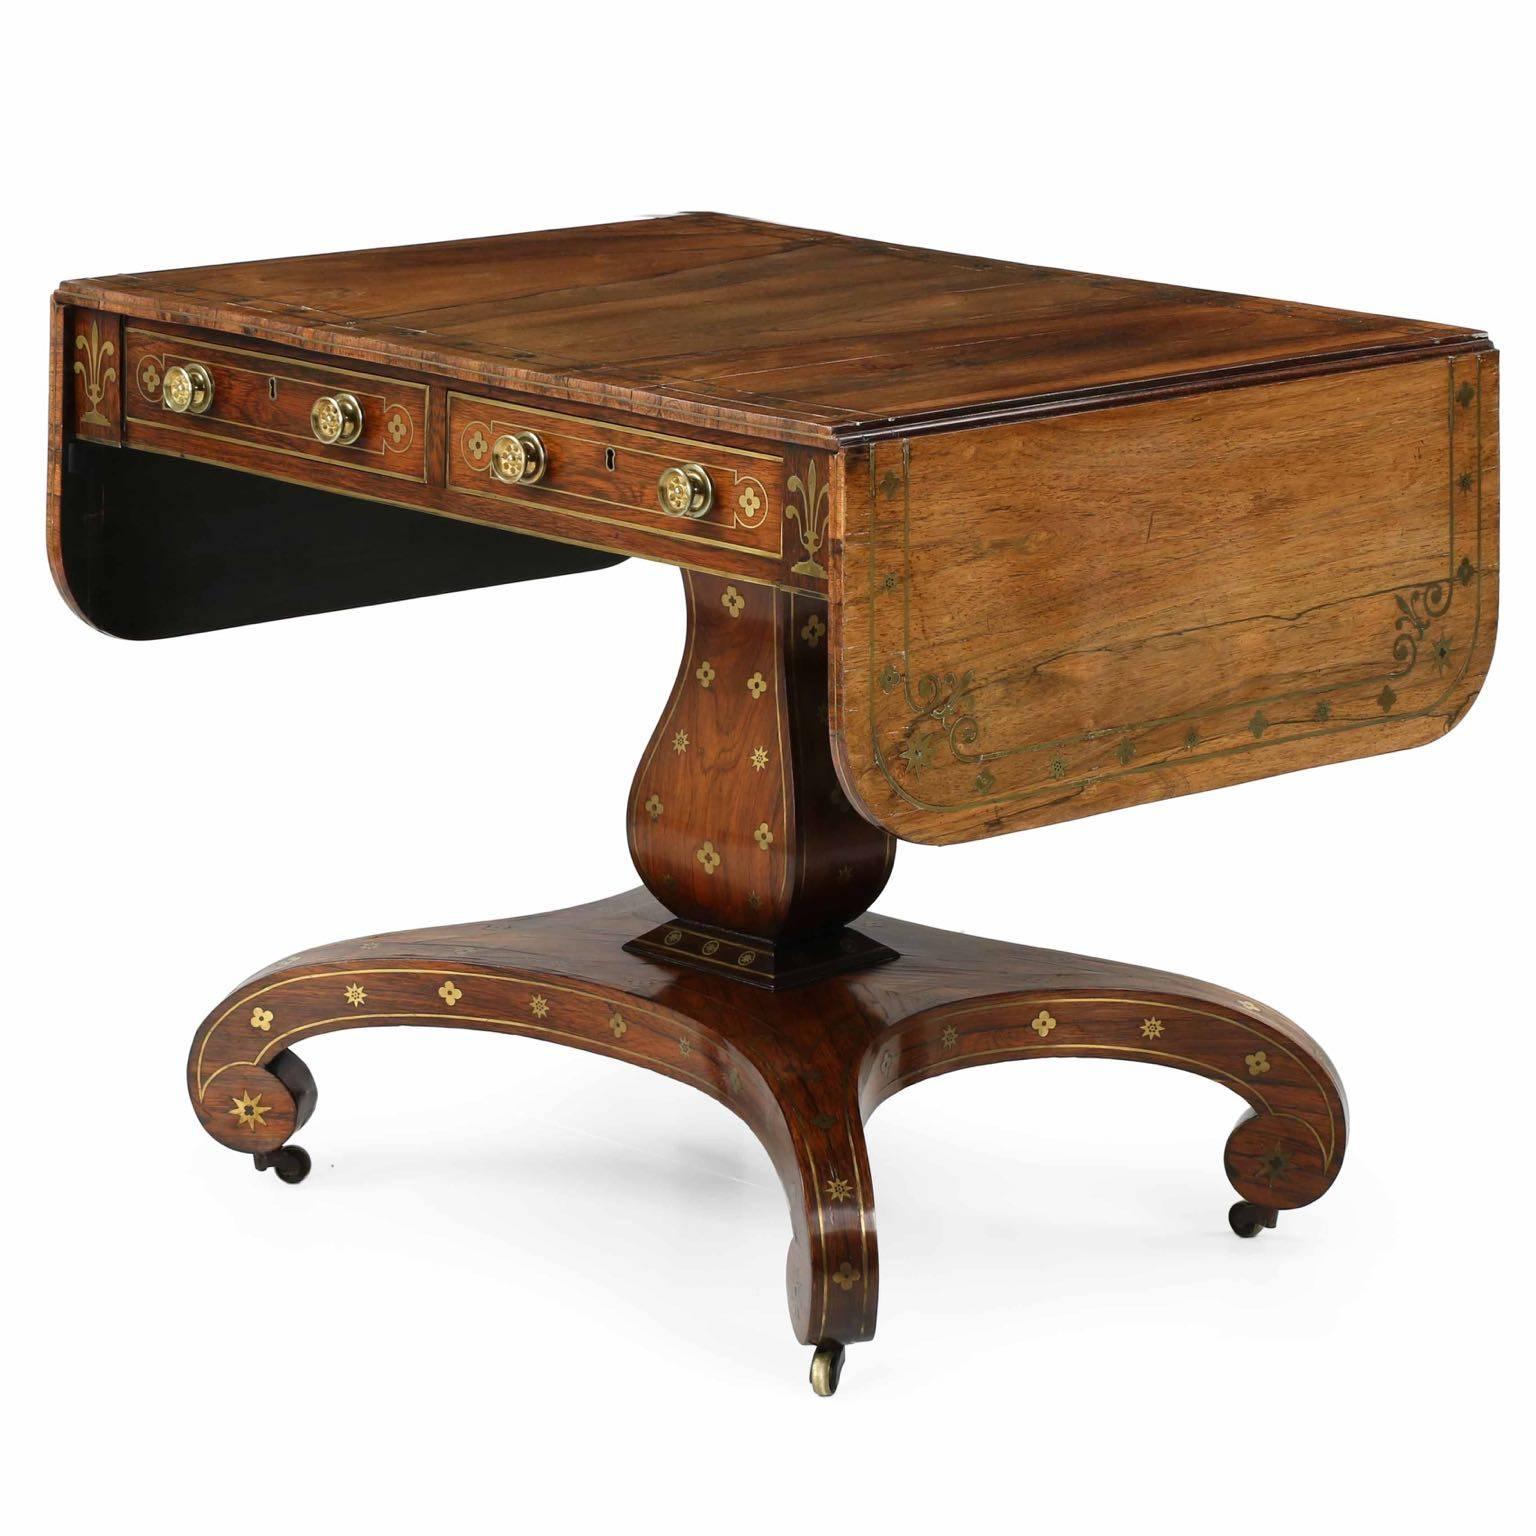 Being a simply superb example of the best quality during the period, this exceedingly fine English Regency sofa table is crafted with a pure eye for design using the best materials available during the period.  Utilizing the highly coveted and